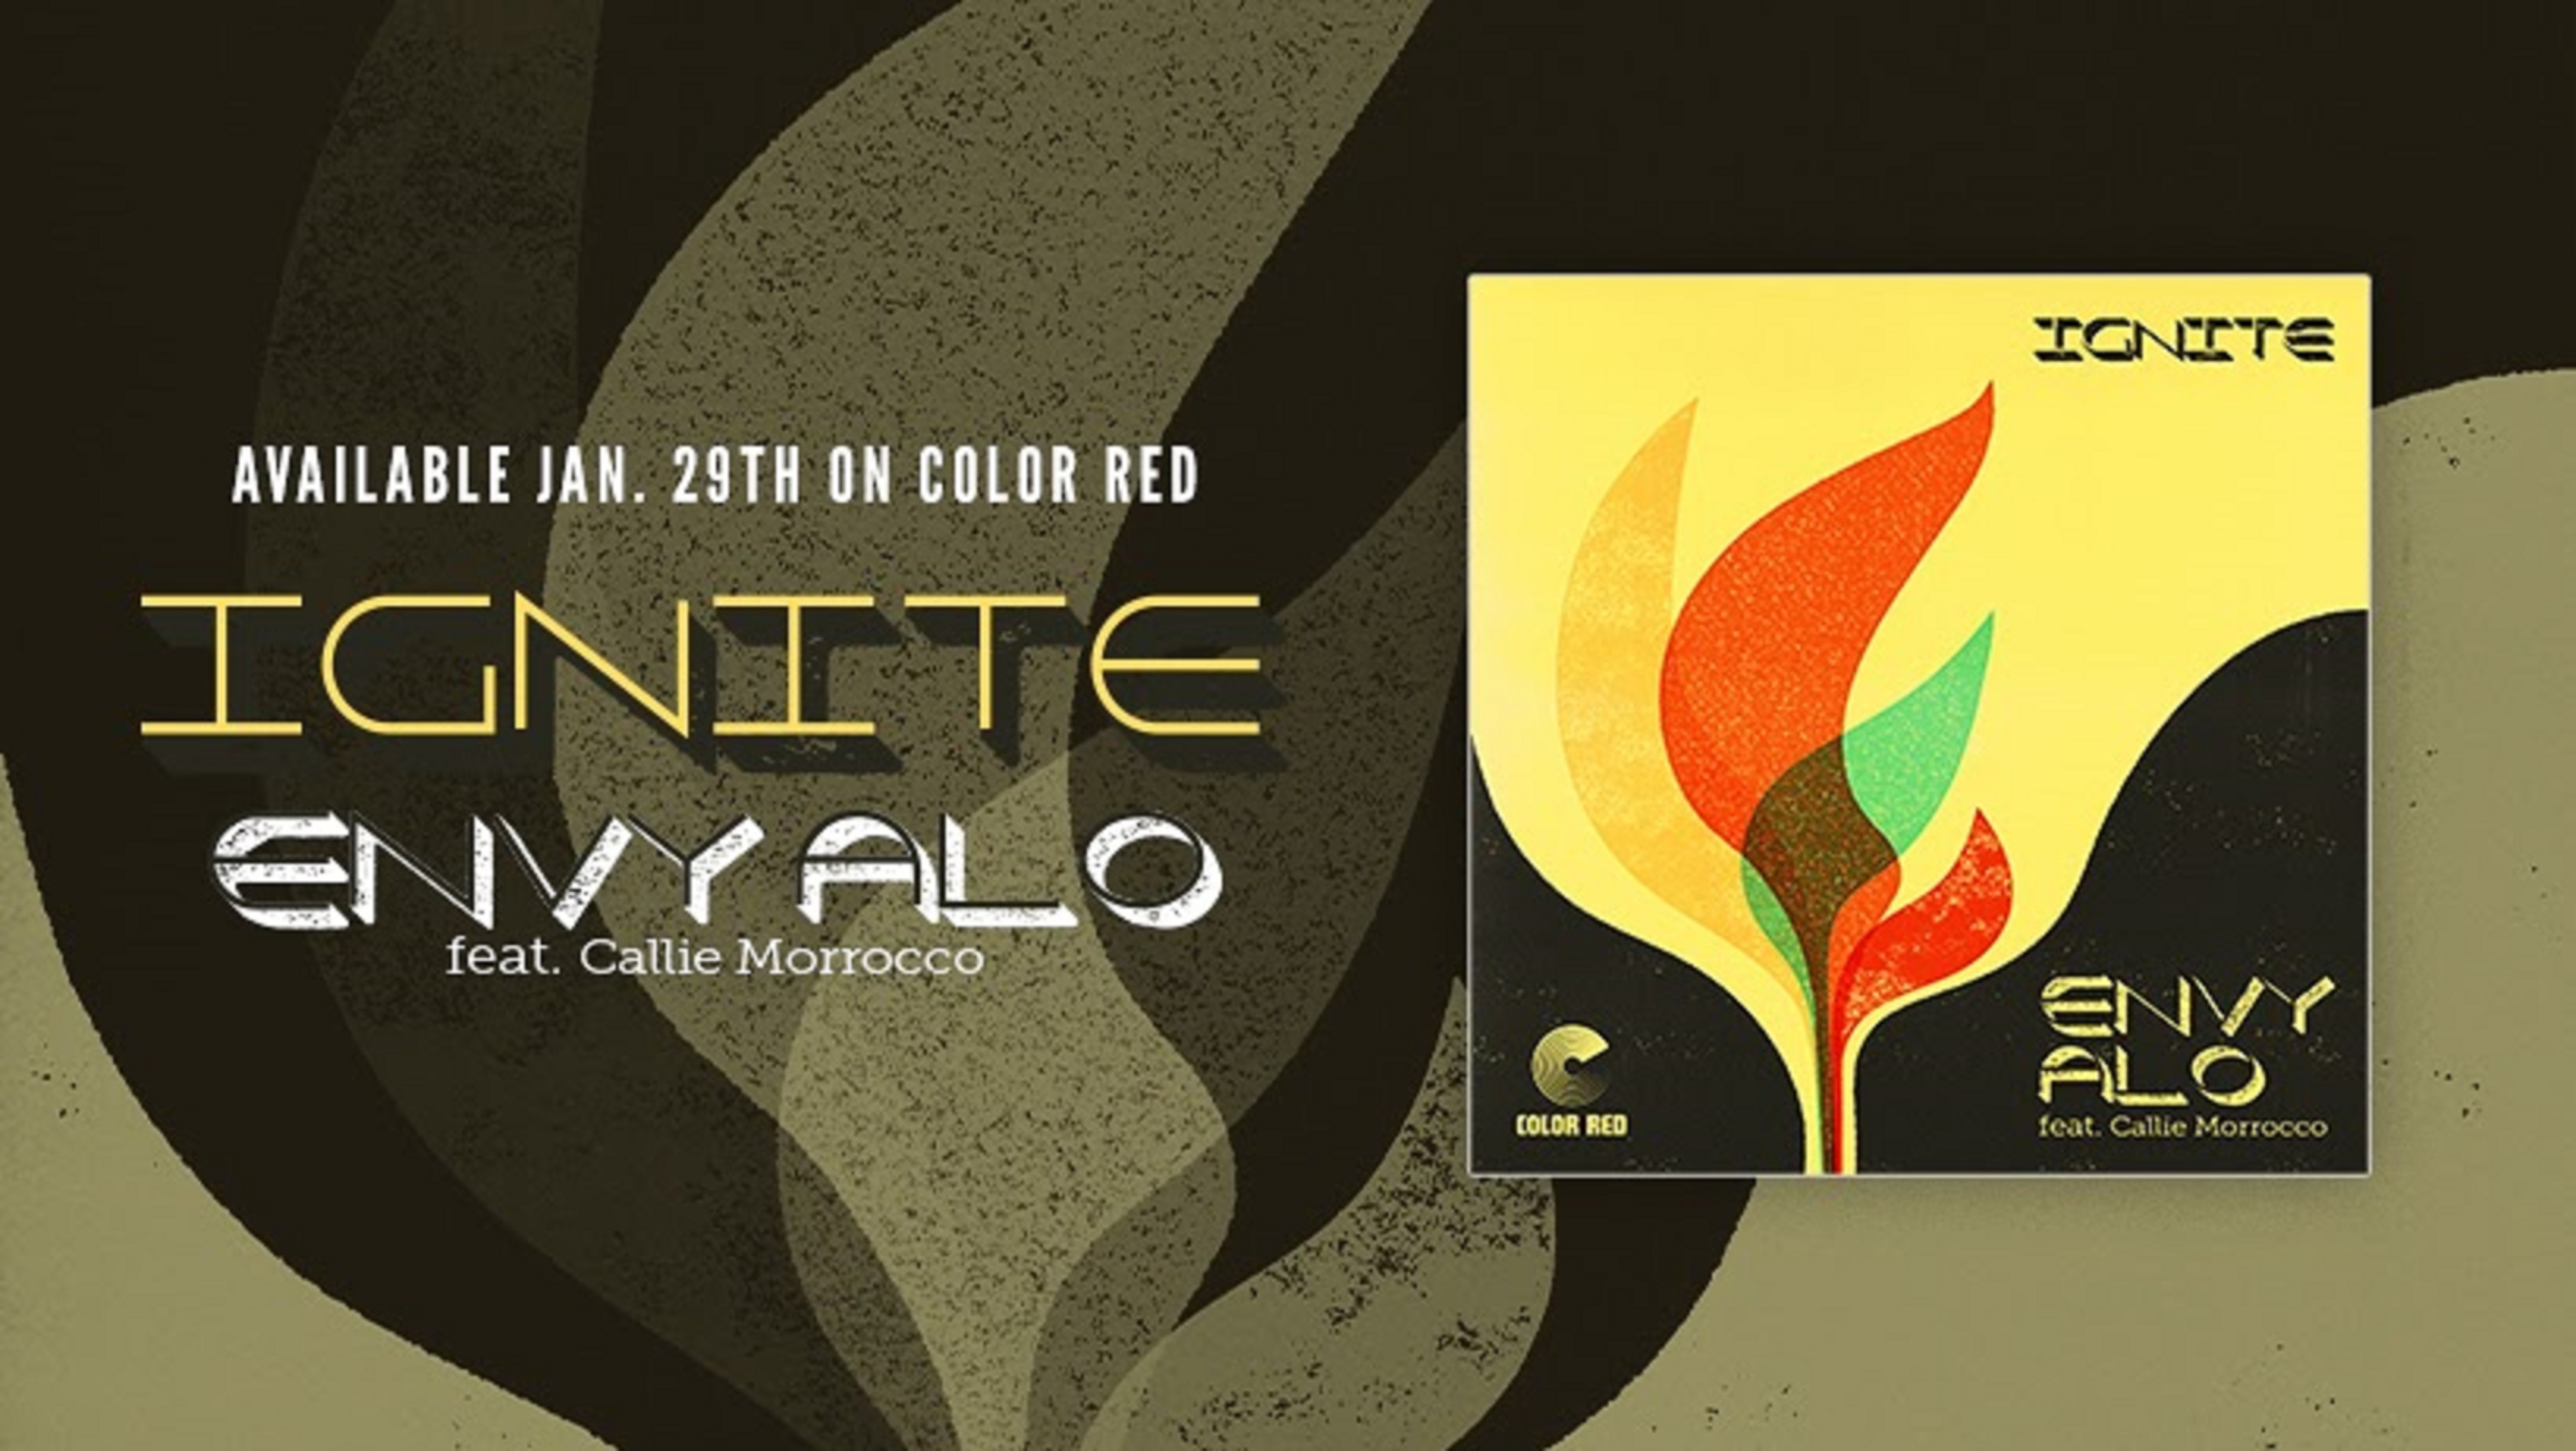 Envy Alo Teams Up With Color Red For New Single Release Featuring Callie Morrocco